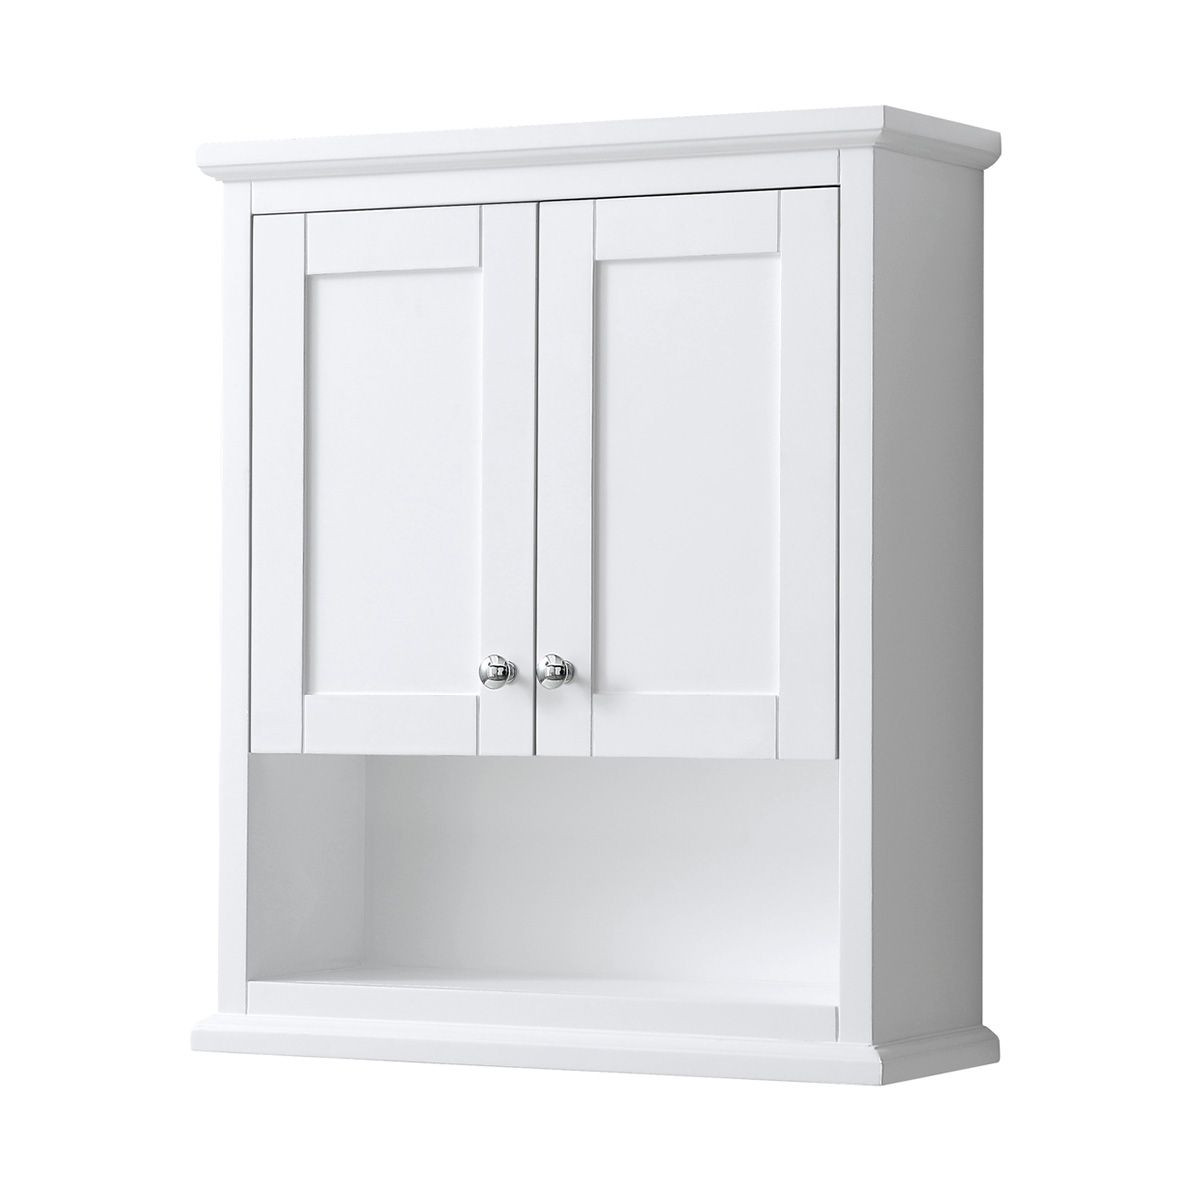 Wall Mounted Bathroom Storage
 Wall Mounted Bathroom Storage Cabinet in White